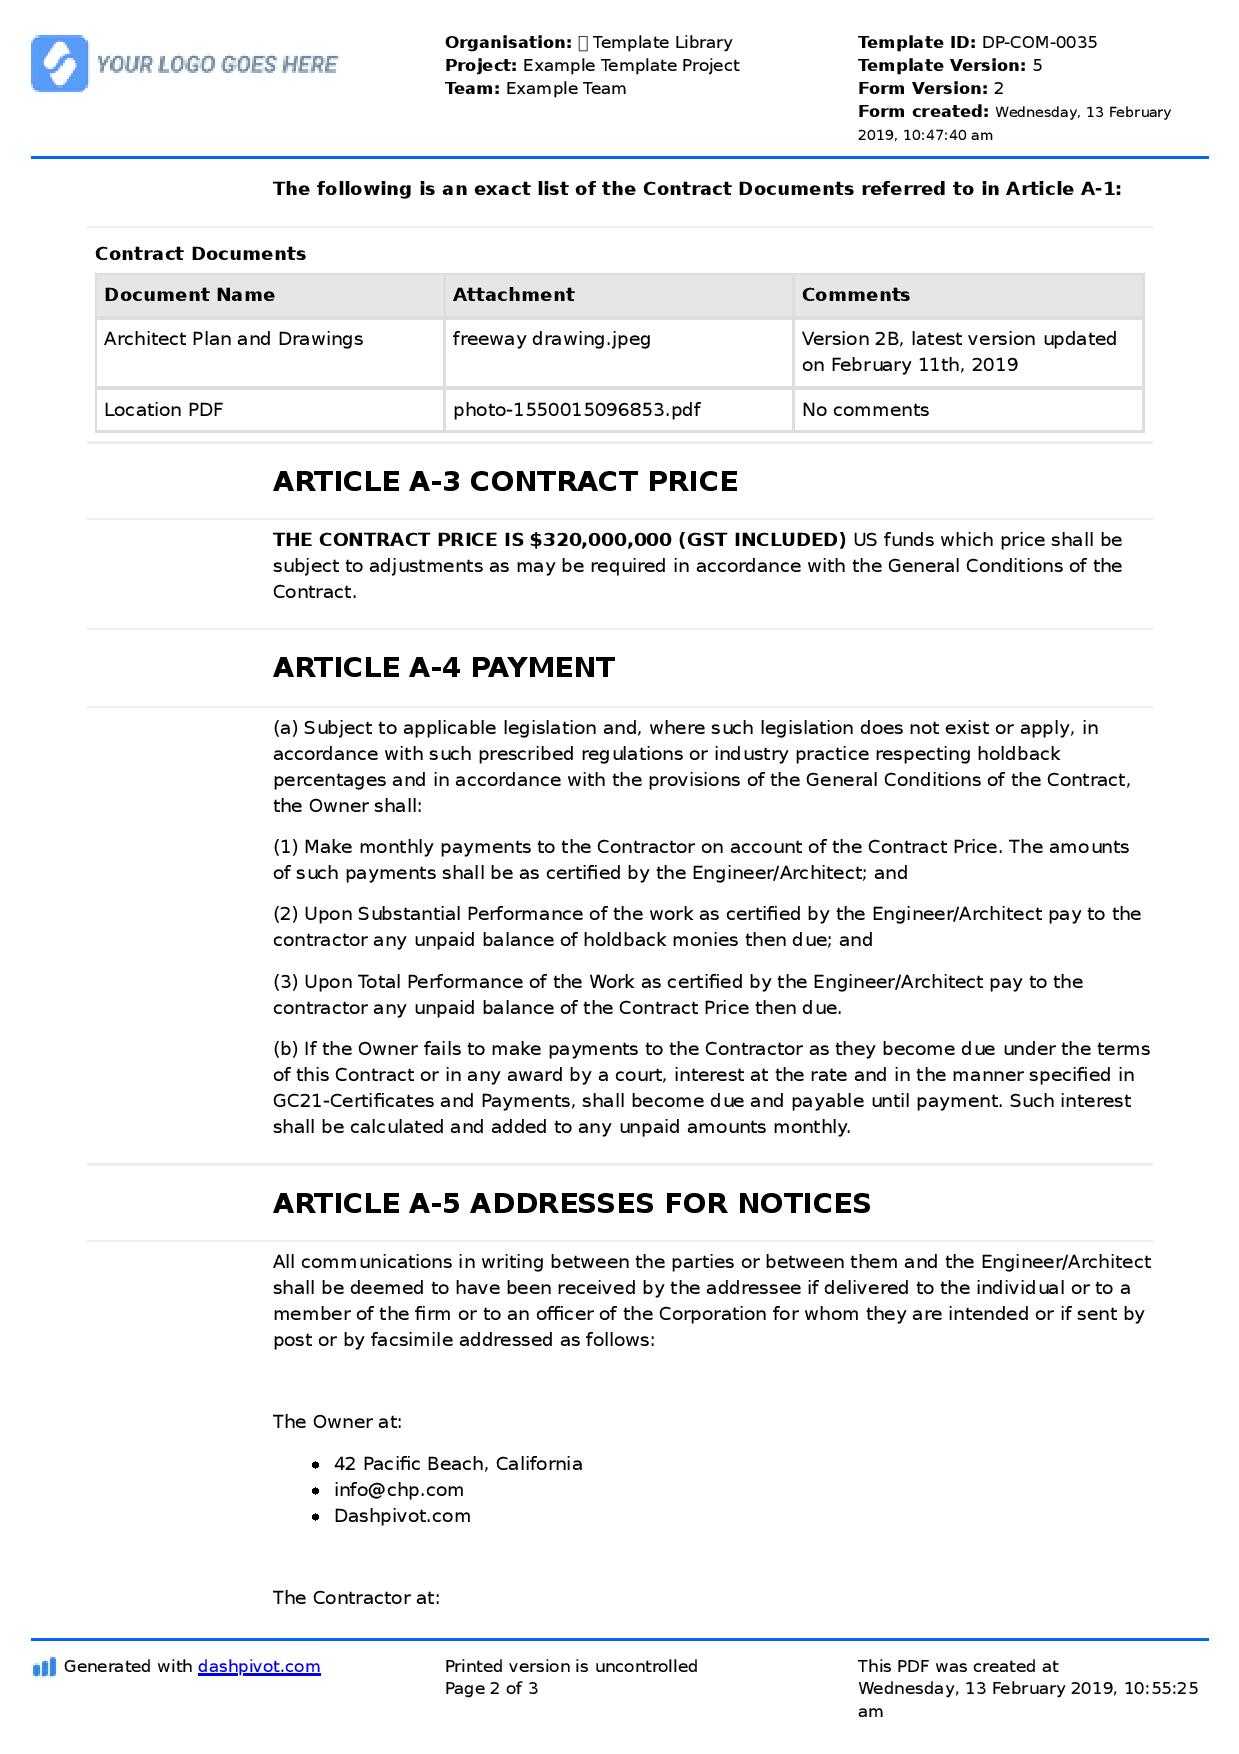 Contract Agreement For Construction Work [Sample + Template] Inside Construction Payment Certificate Template